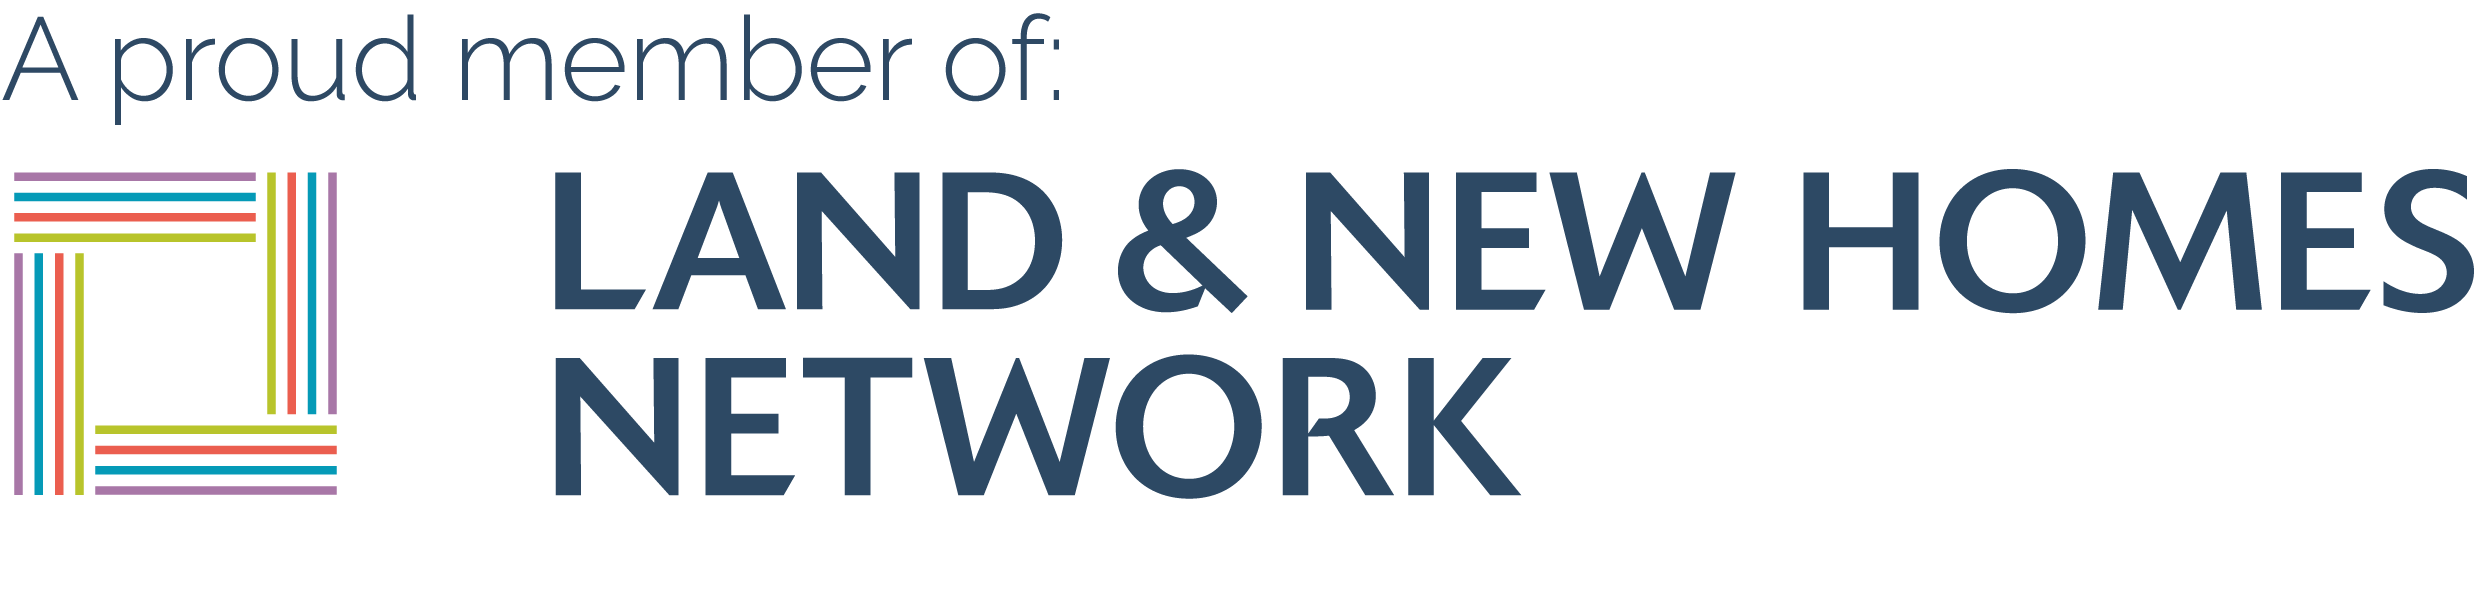 Land & New Homes Network